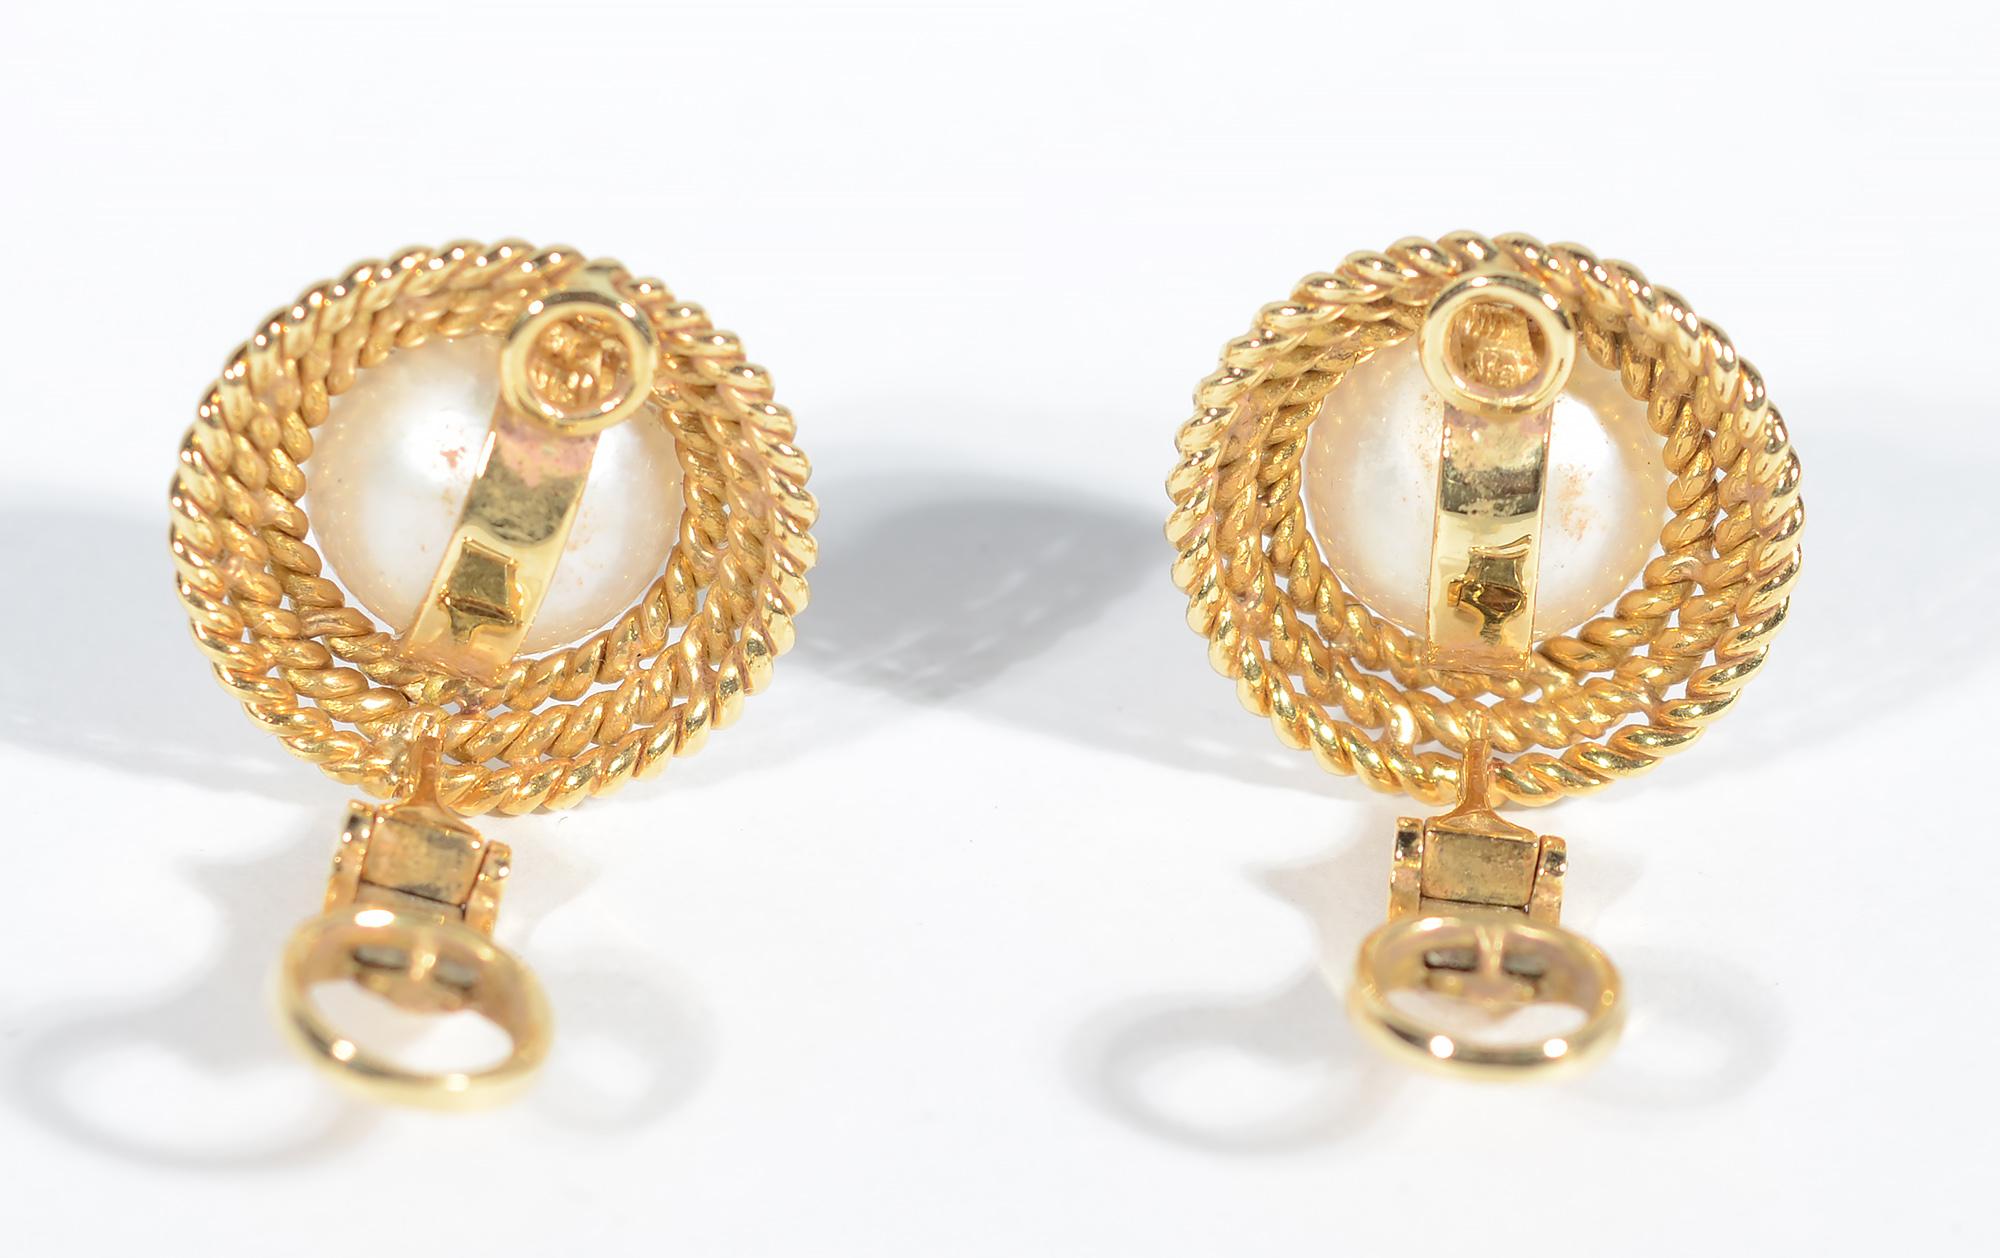 Classic round pearl earrings set in a triple tier collar of twisted gold. The pearls are 12.5 mm. The earrings are 3/4